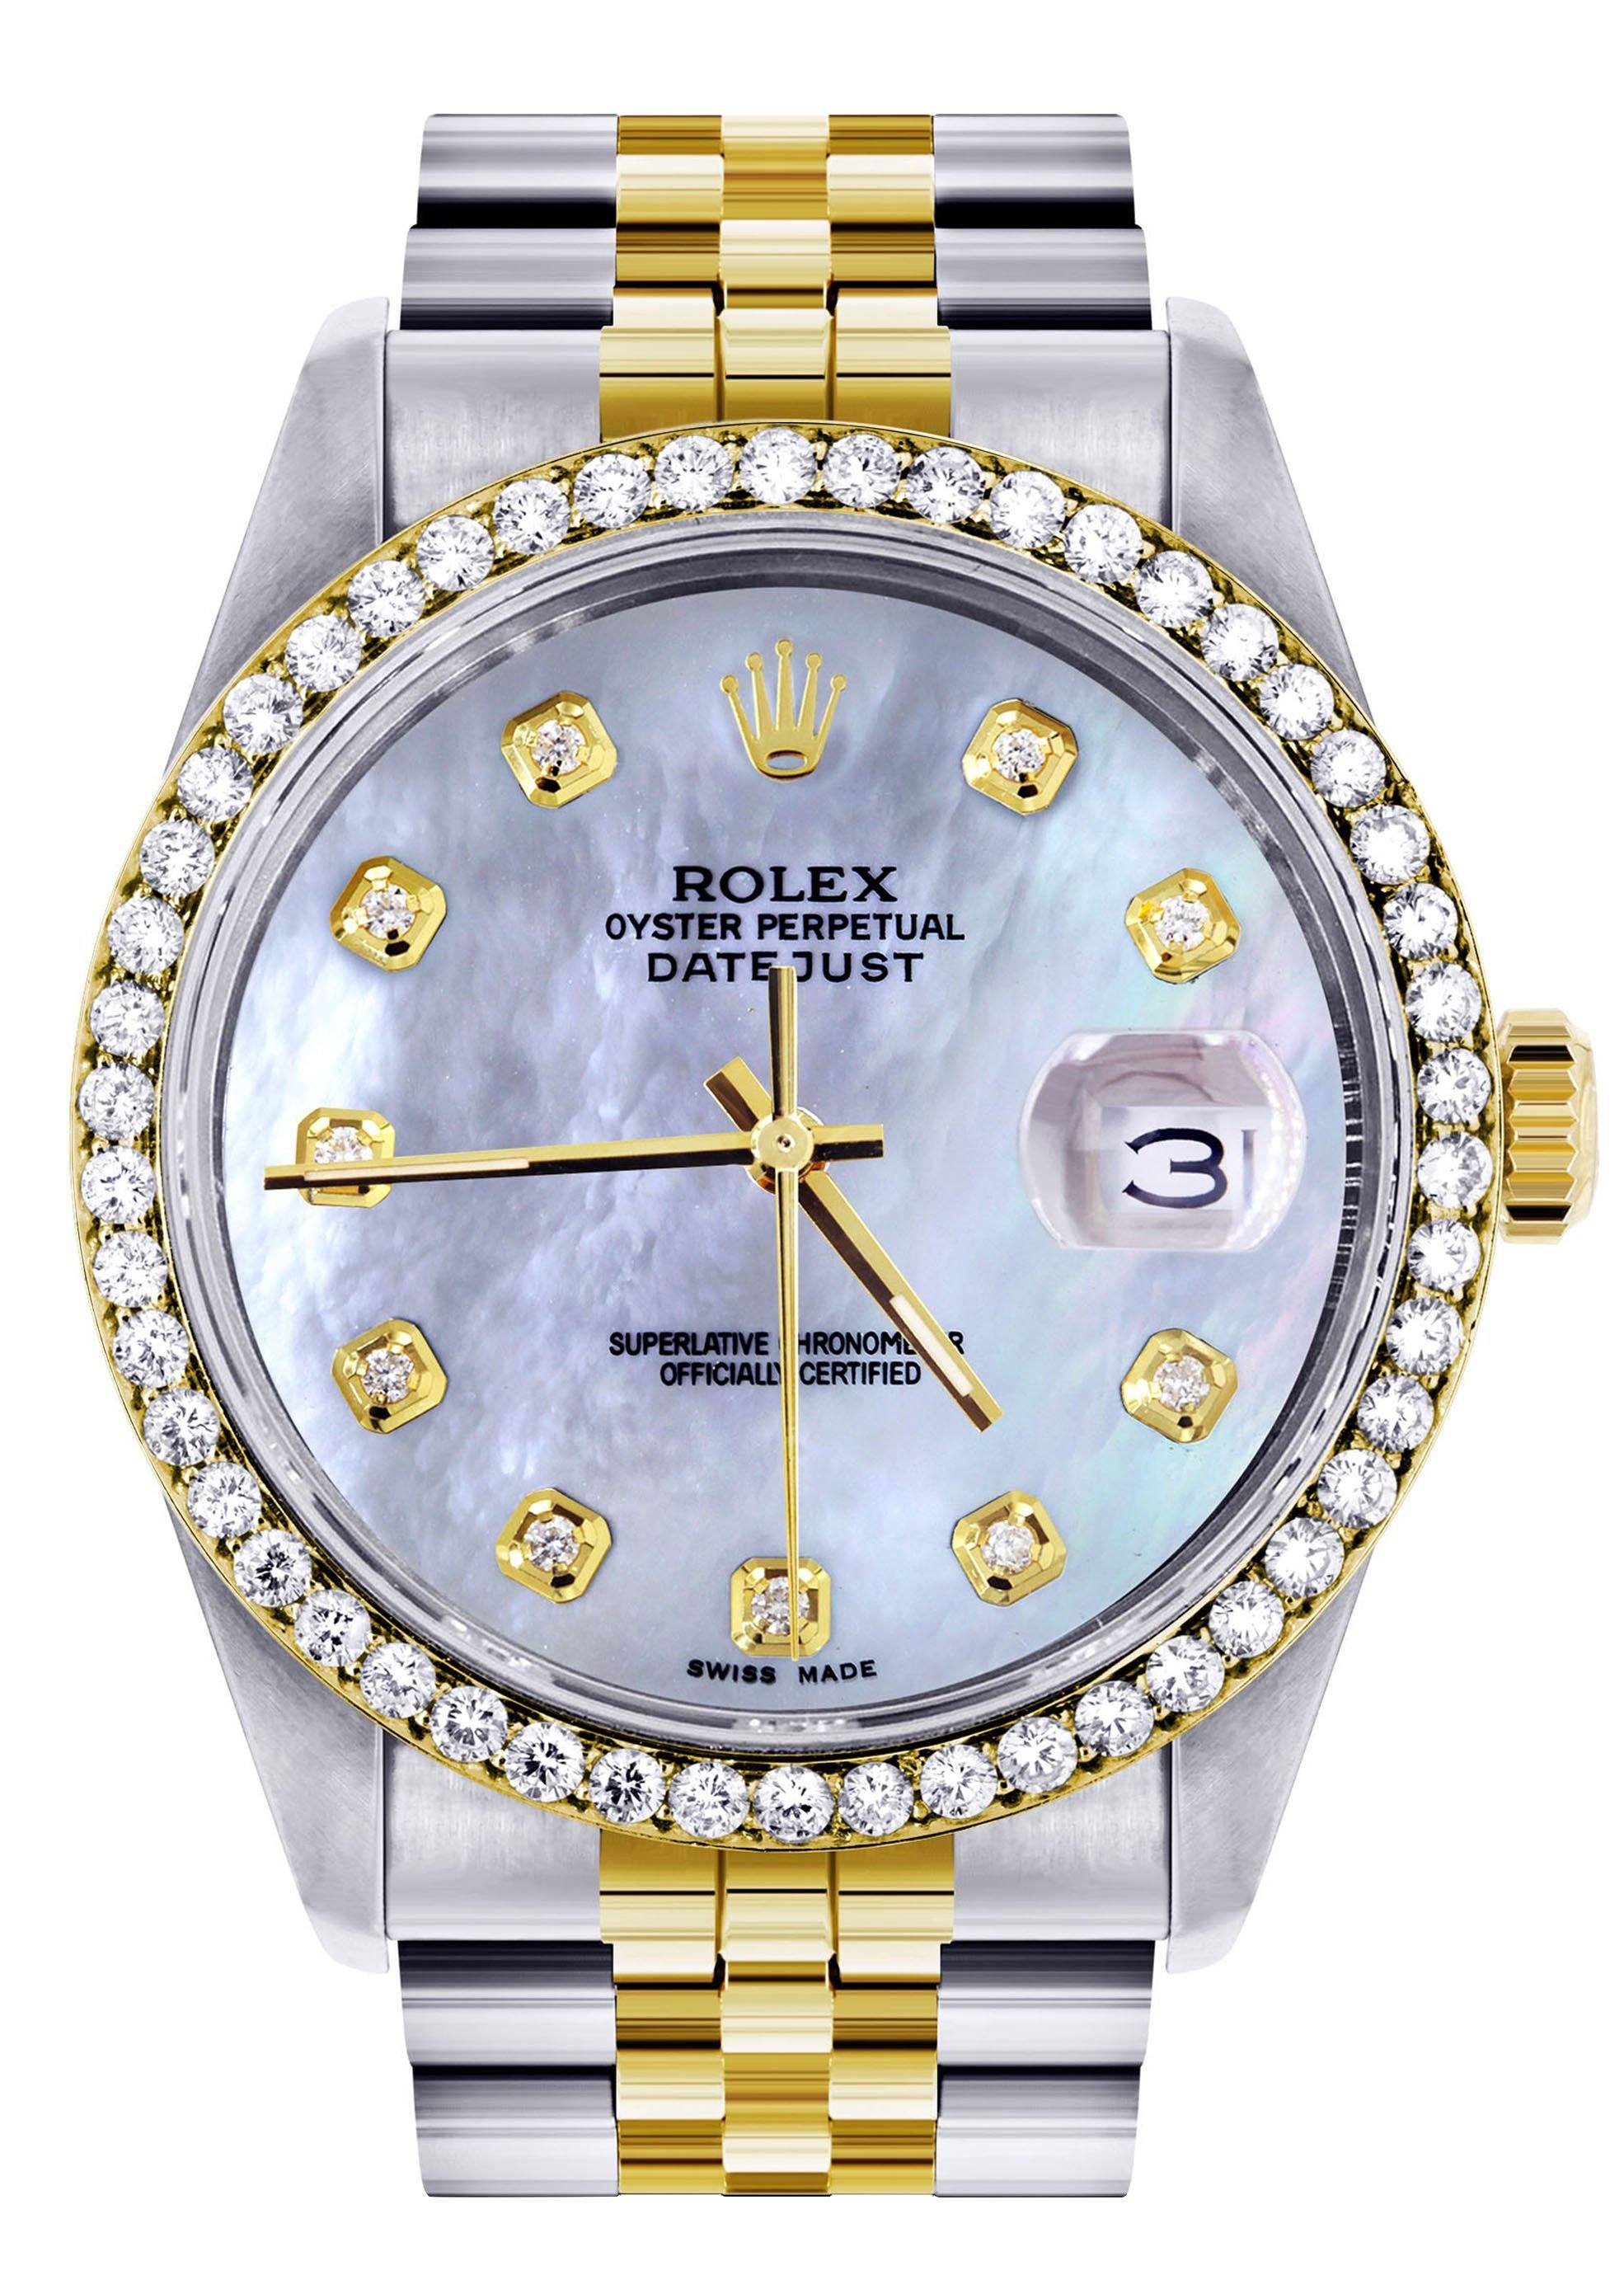 Rolex Datejust 36 Rose Gold/Steel Black Diamond Dial & Fluted Bezel Oy – NY  WATCH LAB